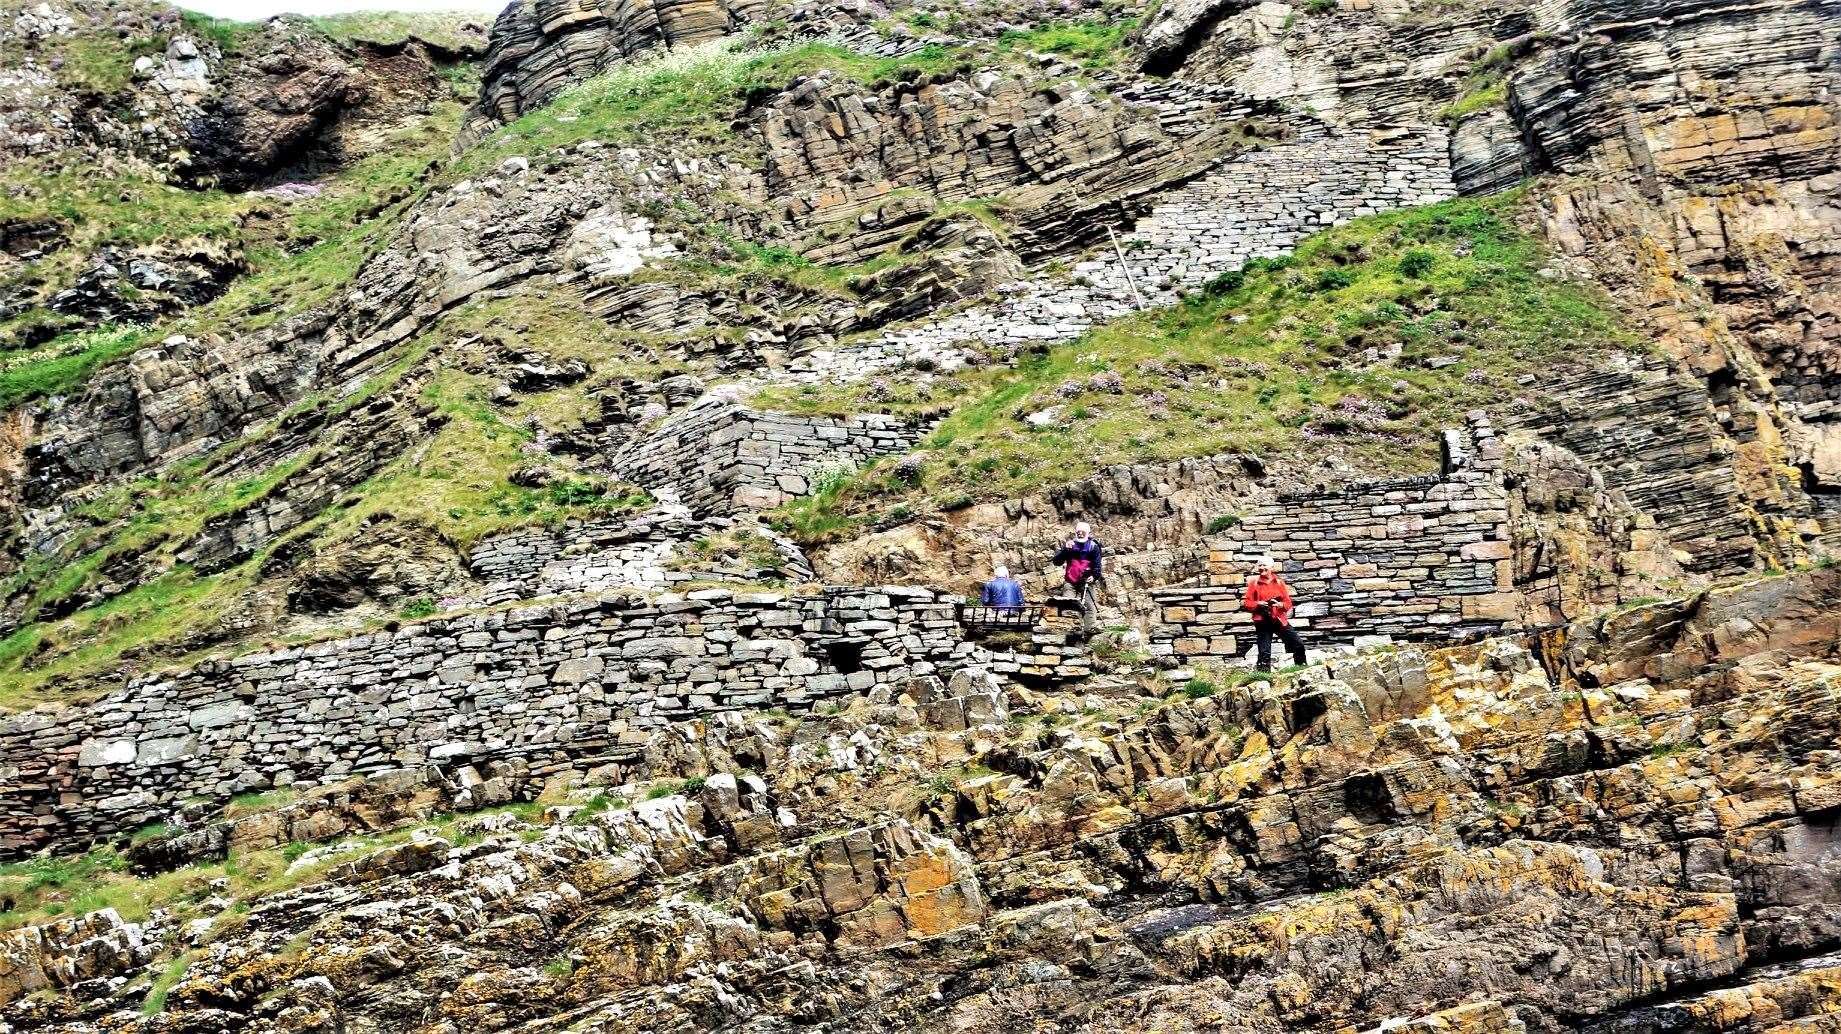 Tourists at Whaligoe Haven. The casualty was reportedly climbing on rocks near this area.